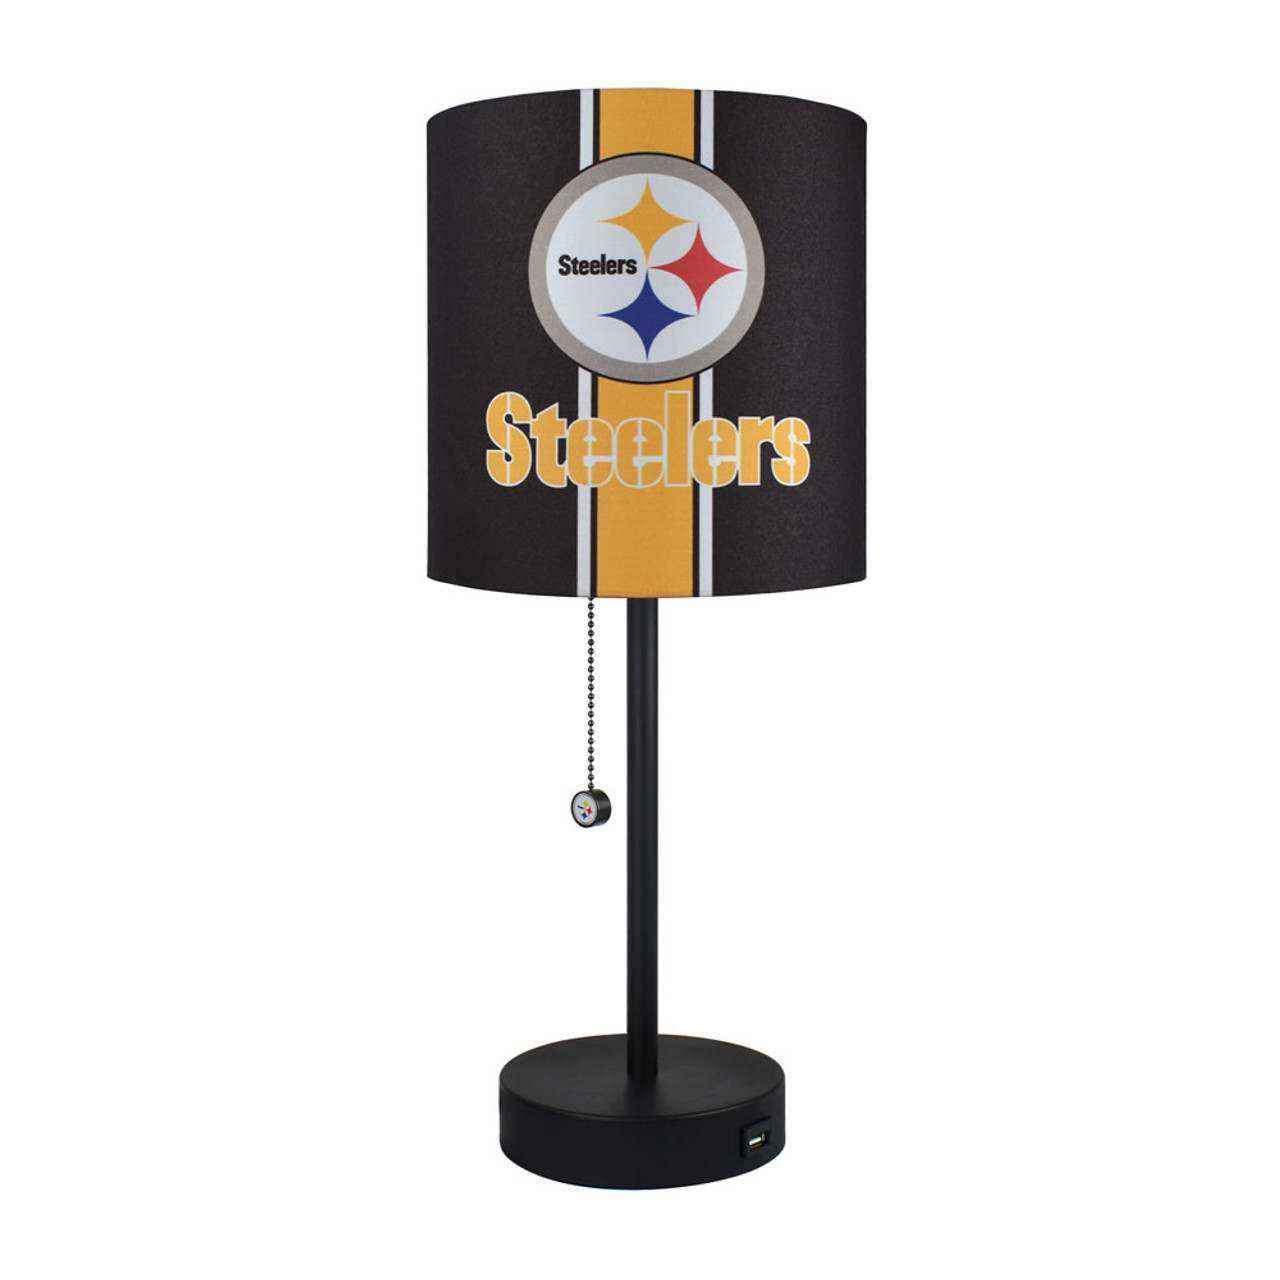 484-1004,  Pittsburgh, Pit, Steelers, Desk, Lamp, Light, NFL, Imperial, FREE SHIPPING